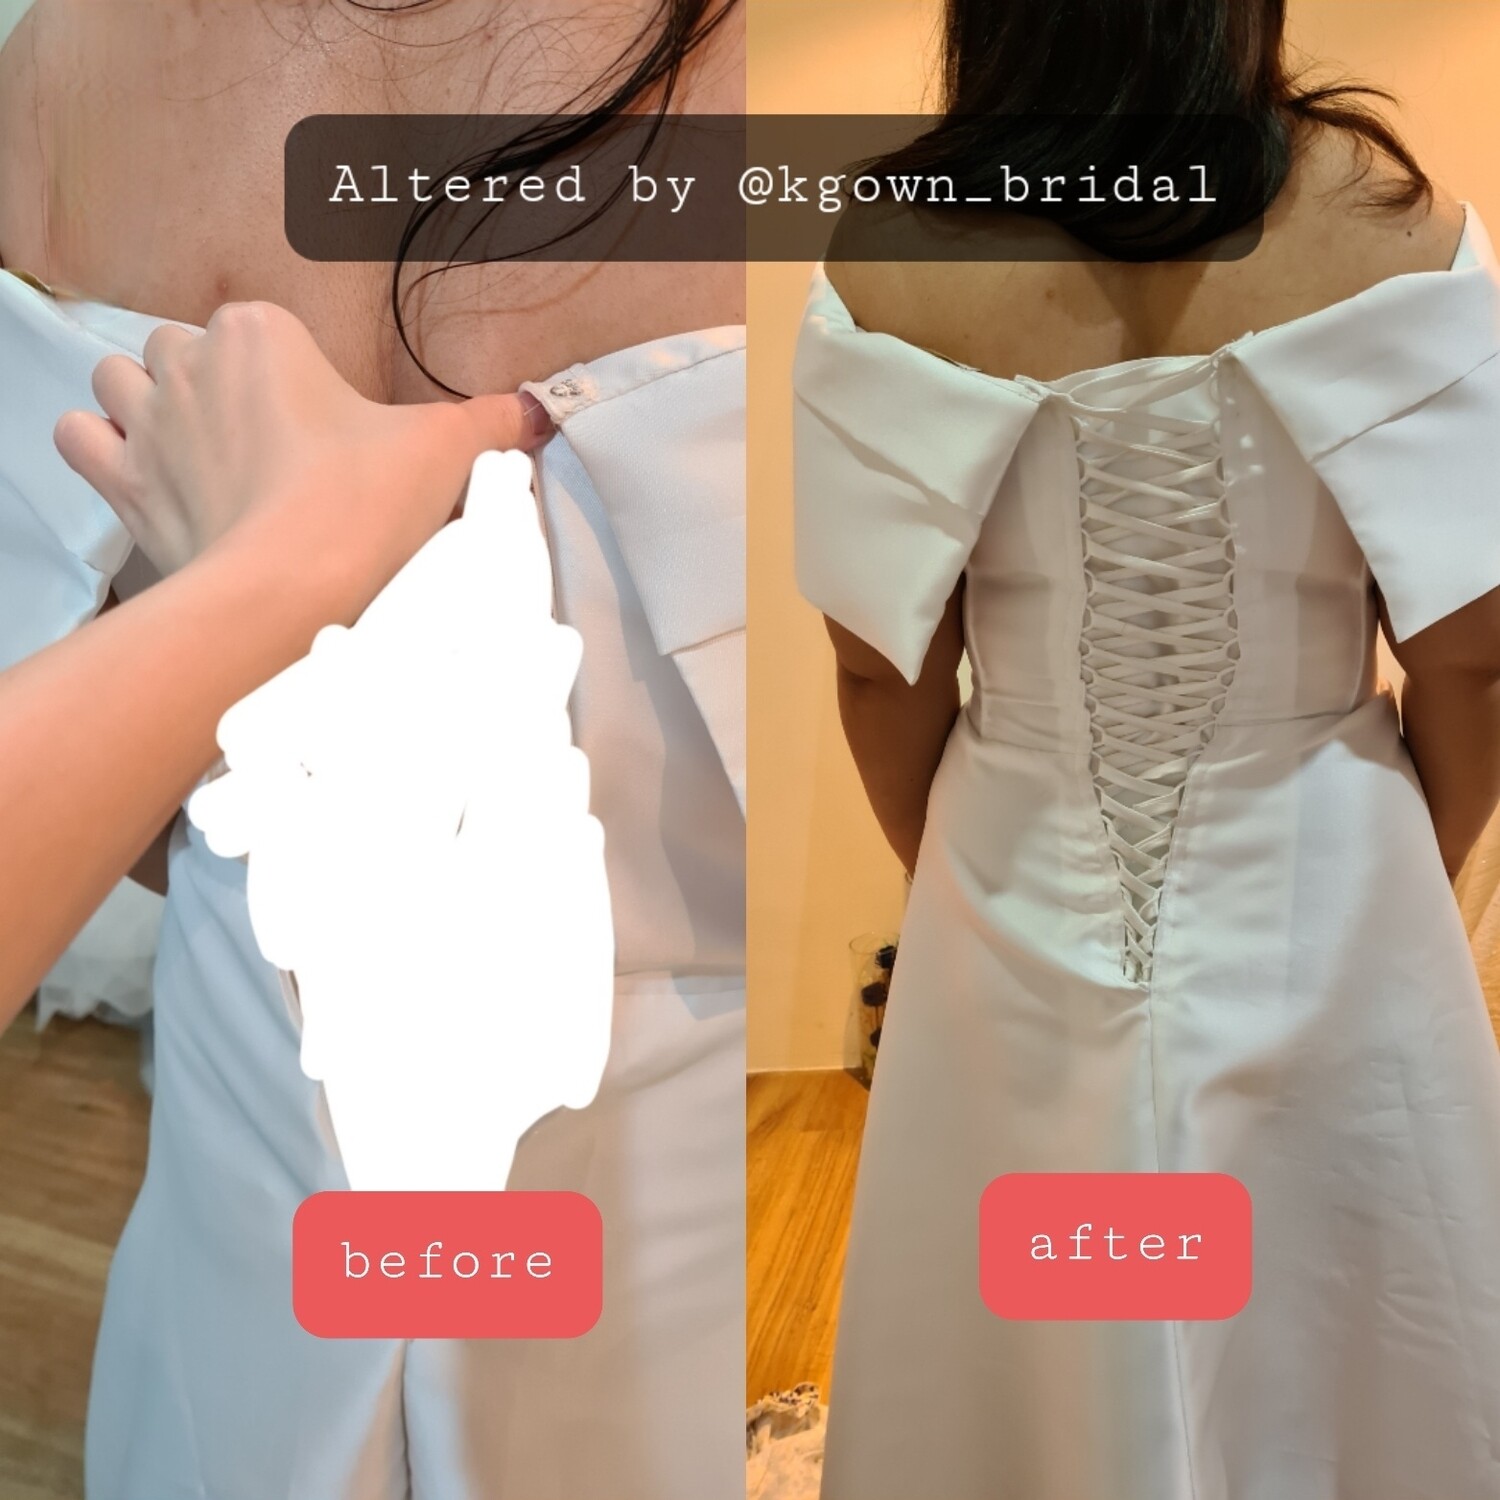 [ Alteration] Replacing zipper with corset lace up back